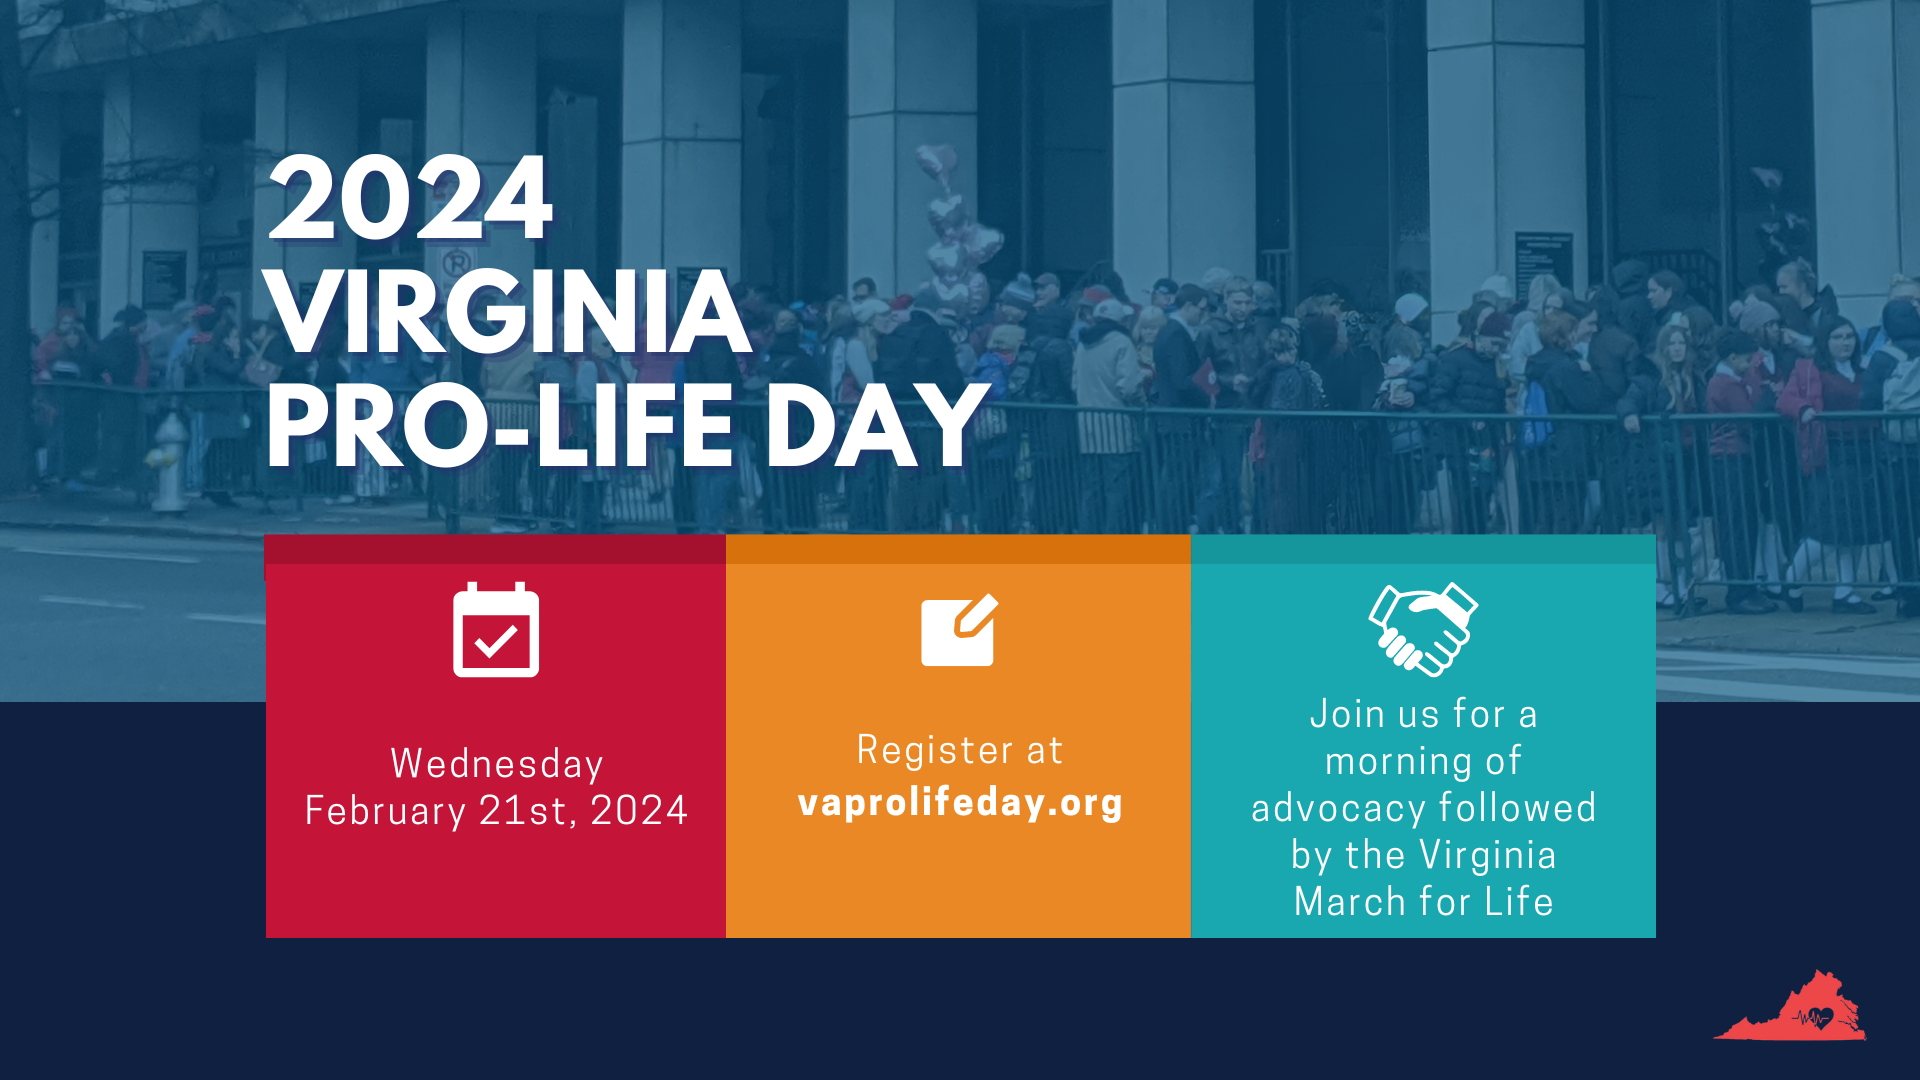 Save the Date, Defending Life Day, Feb. 1, 2023